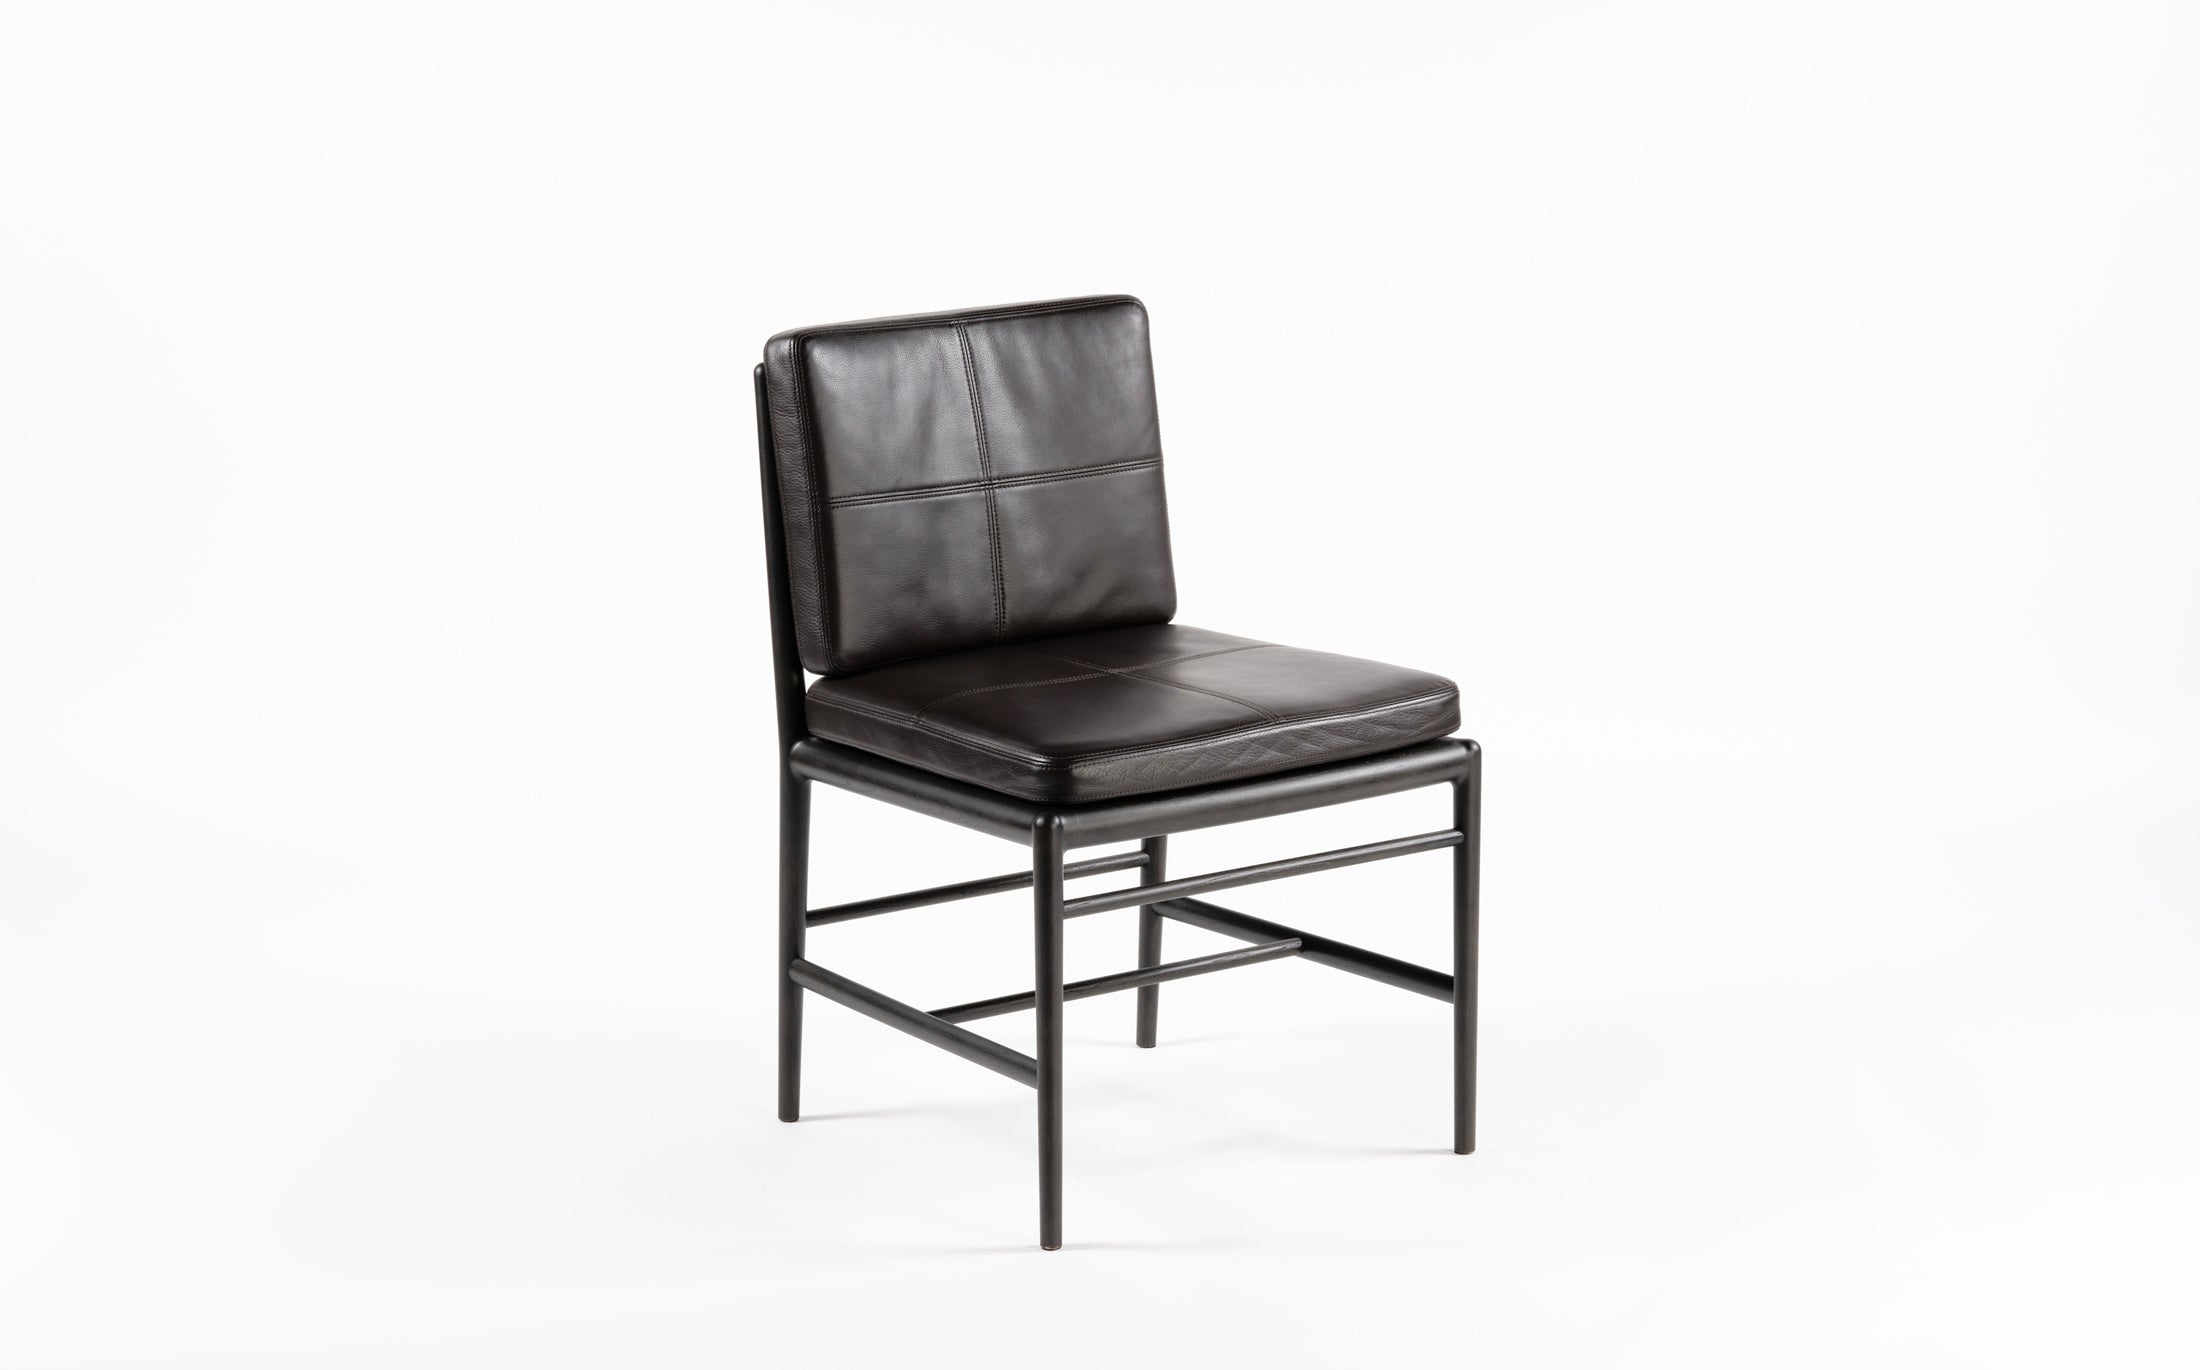 The sensitive comfortable side chair - Charcoal grey